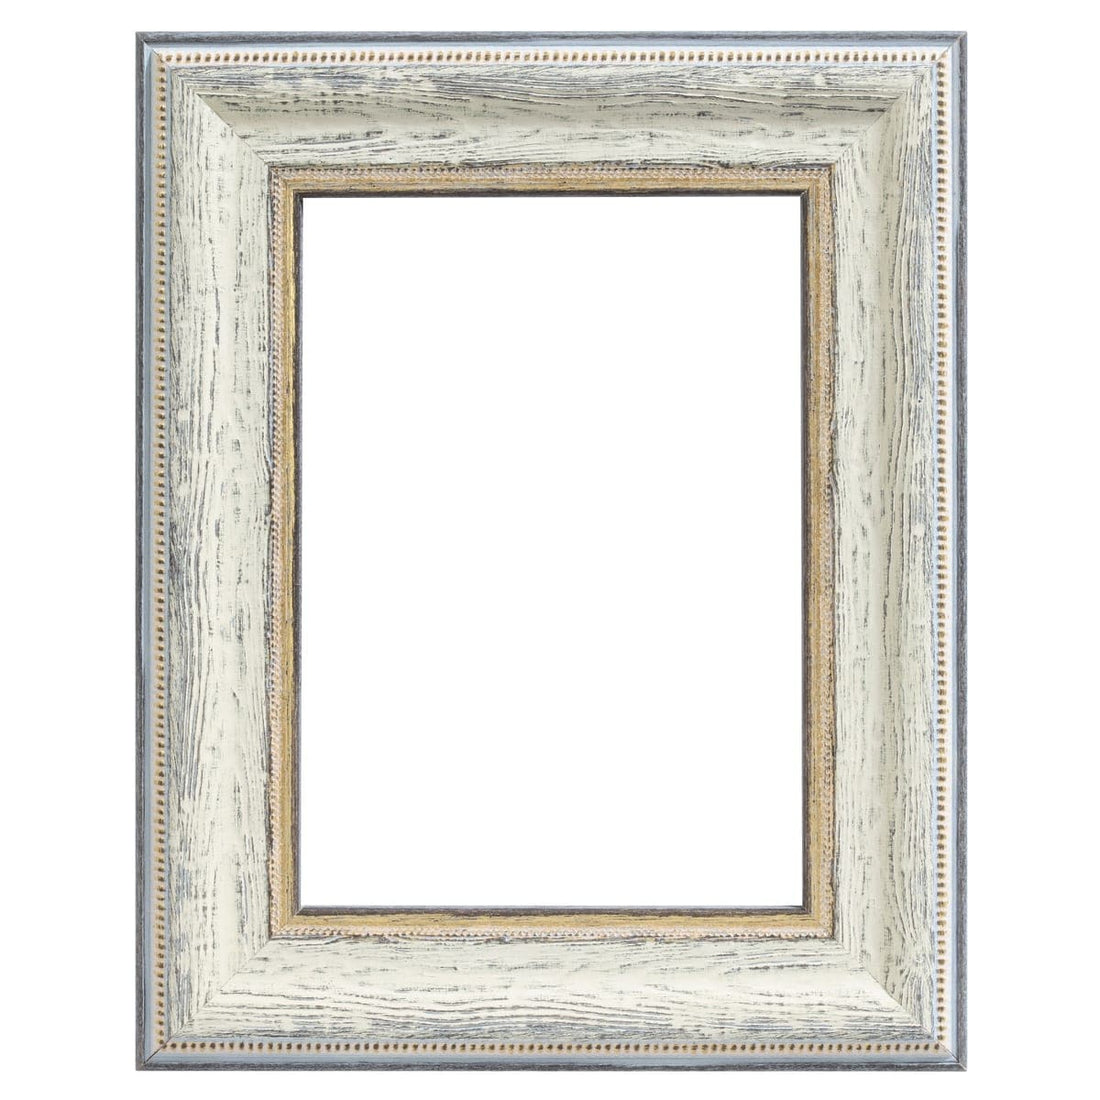 FABRIANO FRAME 18X24 BLEACHED WOOD - best price from Maltashopper.com BR480005016